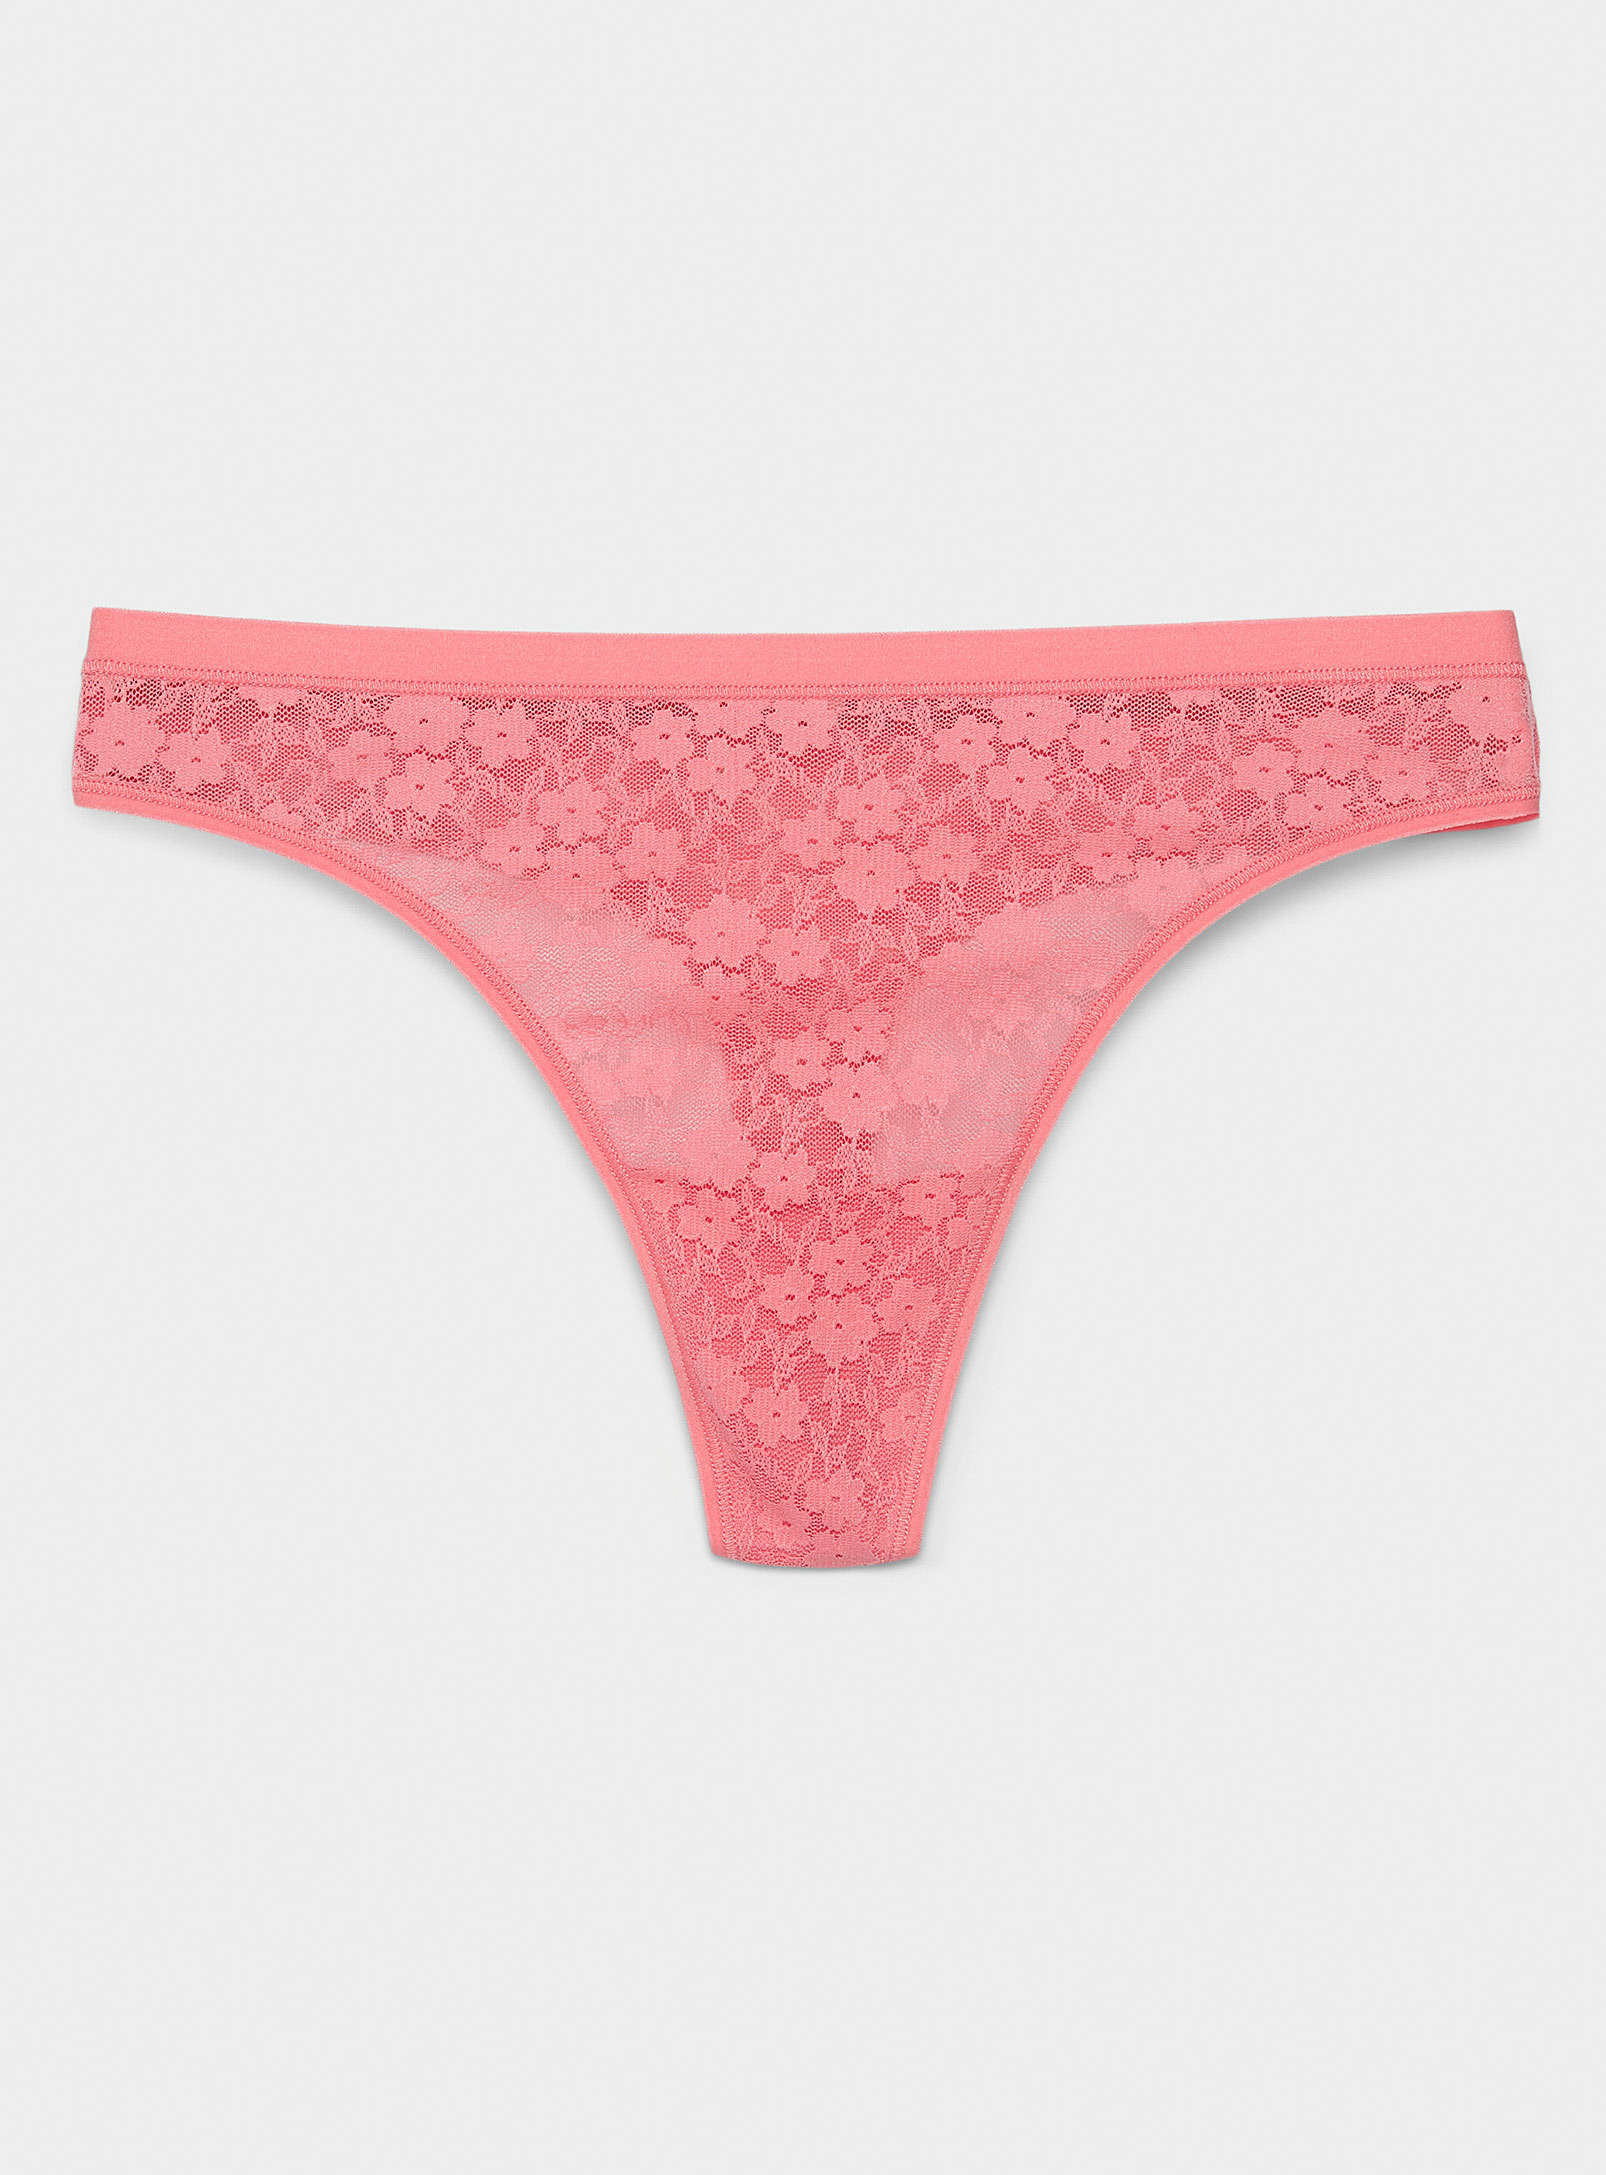 Miiyu Small Flowers Lace Thong In Pink